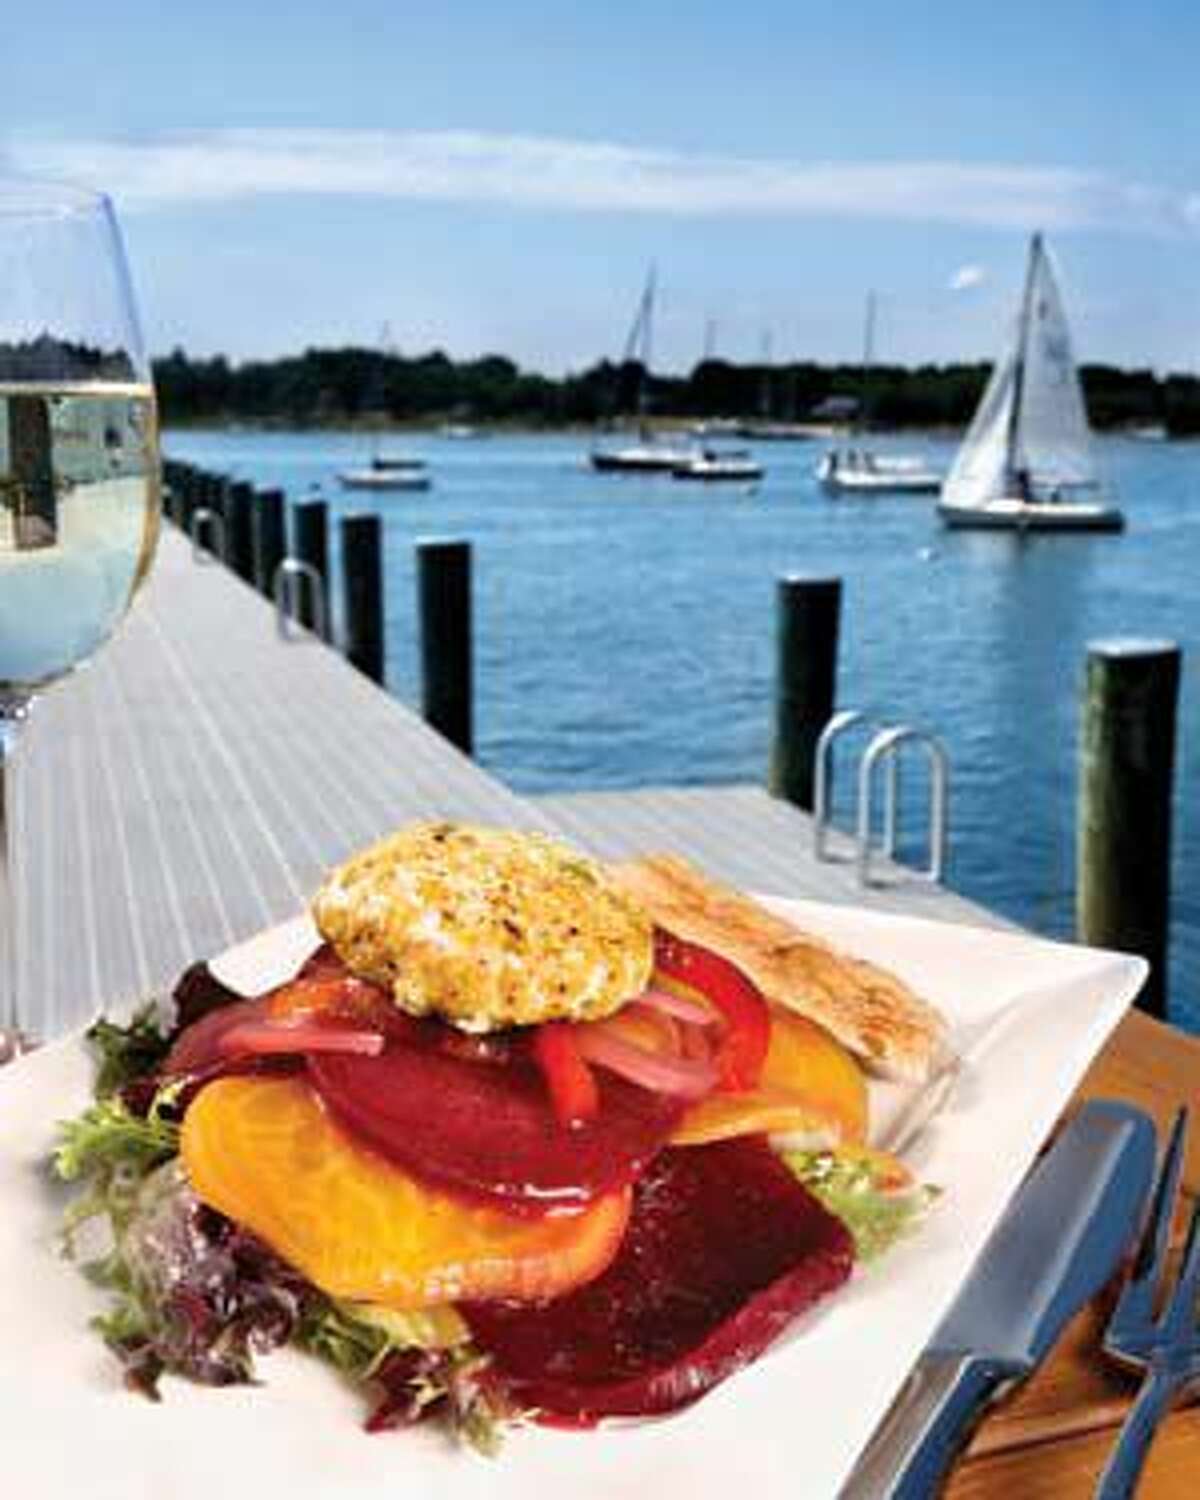 A roasted beet salad—with a view.